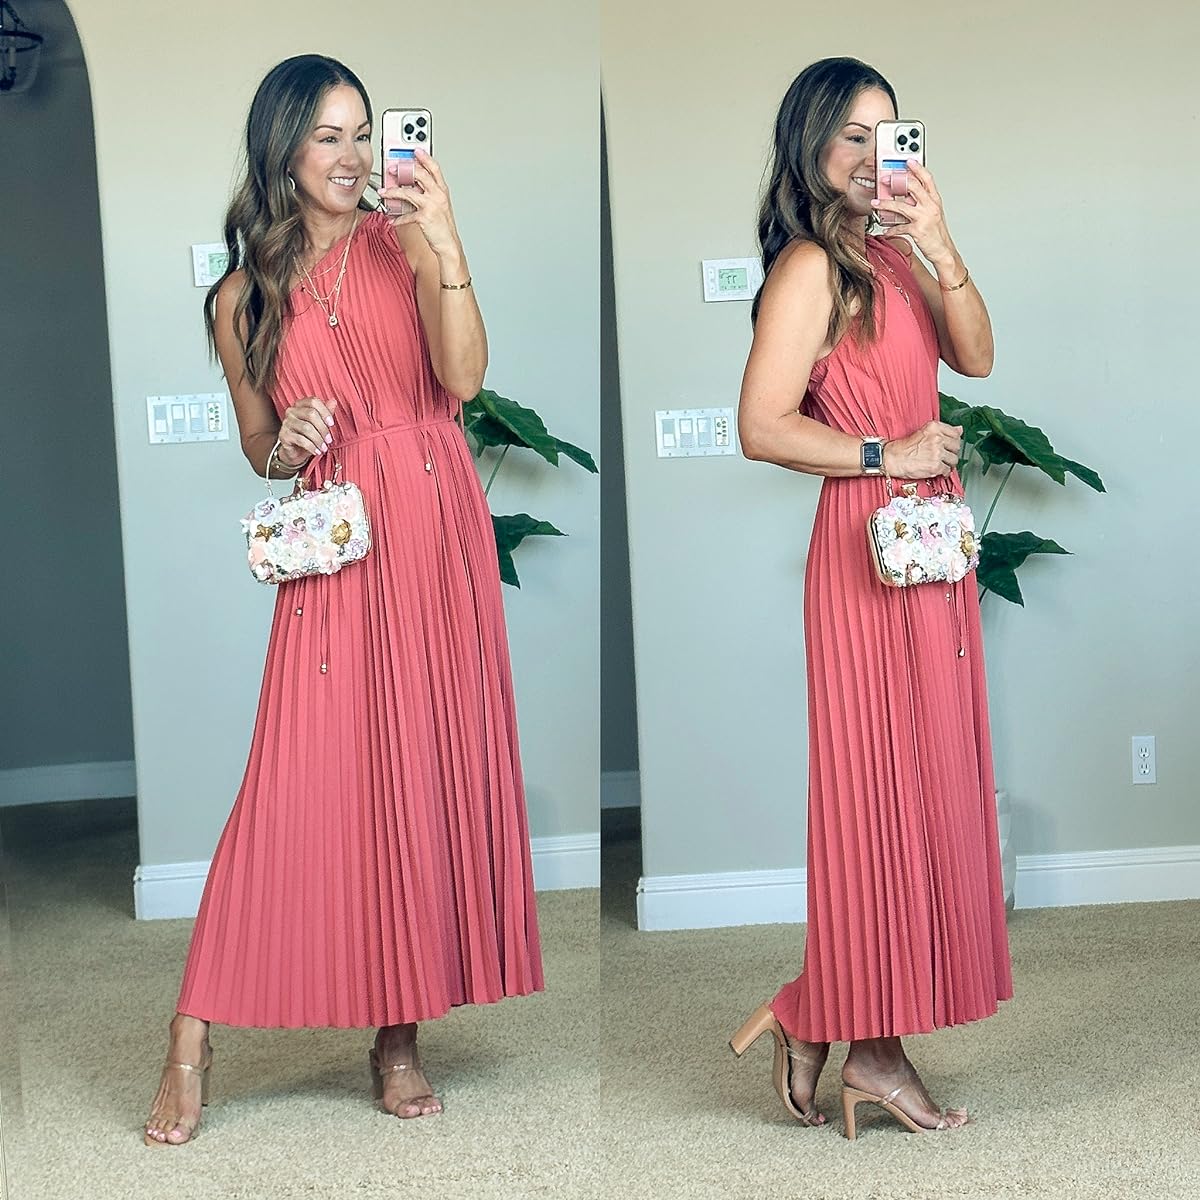 Spring into the season with these must-see dresses, accessories, and more | spring, spring fashion, spring dress, spring dresses, maxi dress, pleated dress, wedding guest dress, spring wedding, floral purse, clutch, accessories, heels